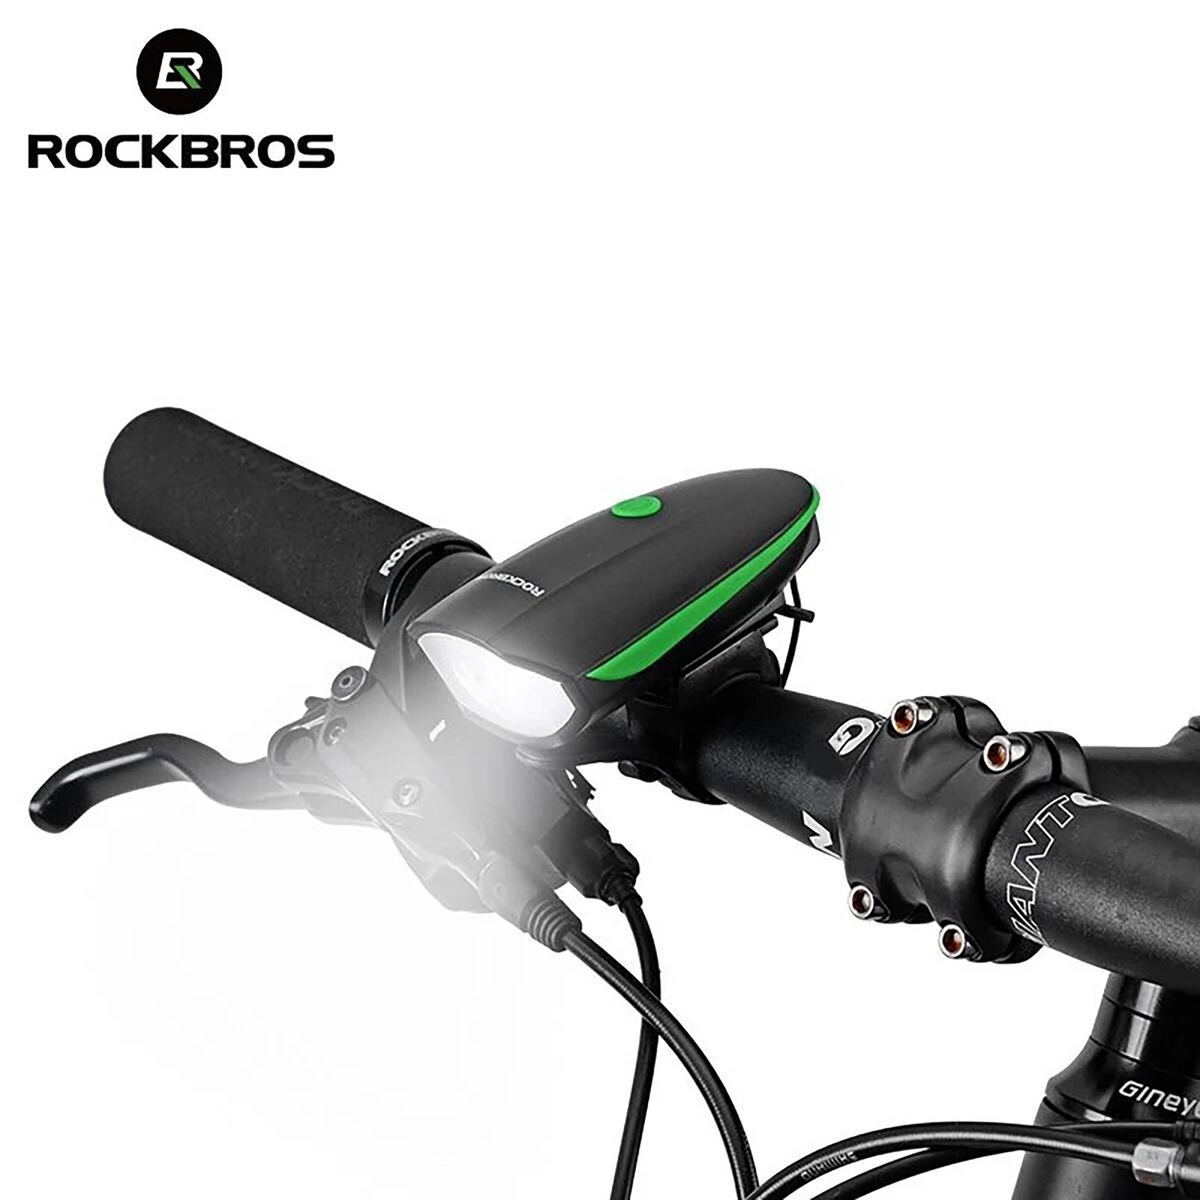 ROCKBROS Bicycle Rechargeable Light with Horn 7588-BL Black Blue